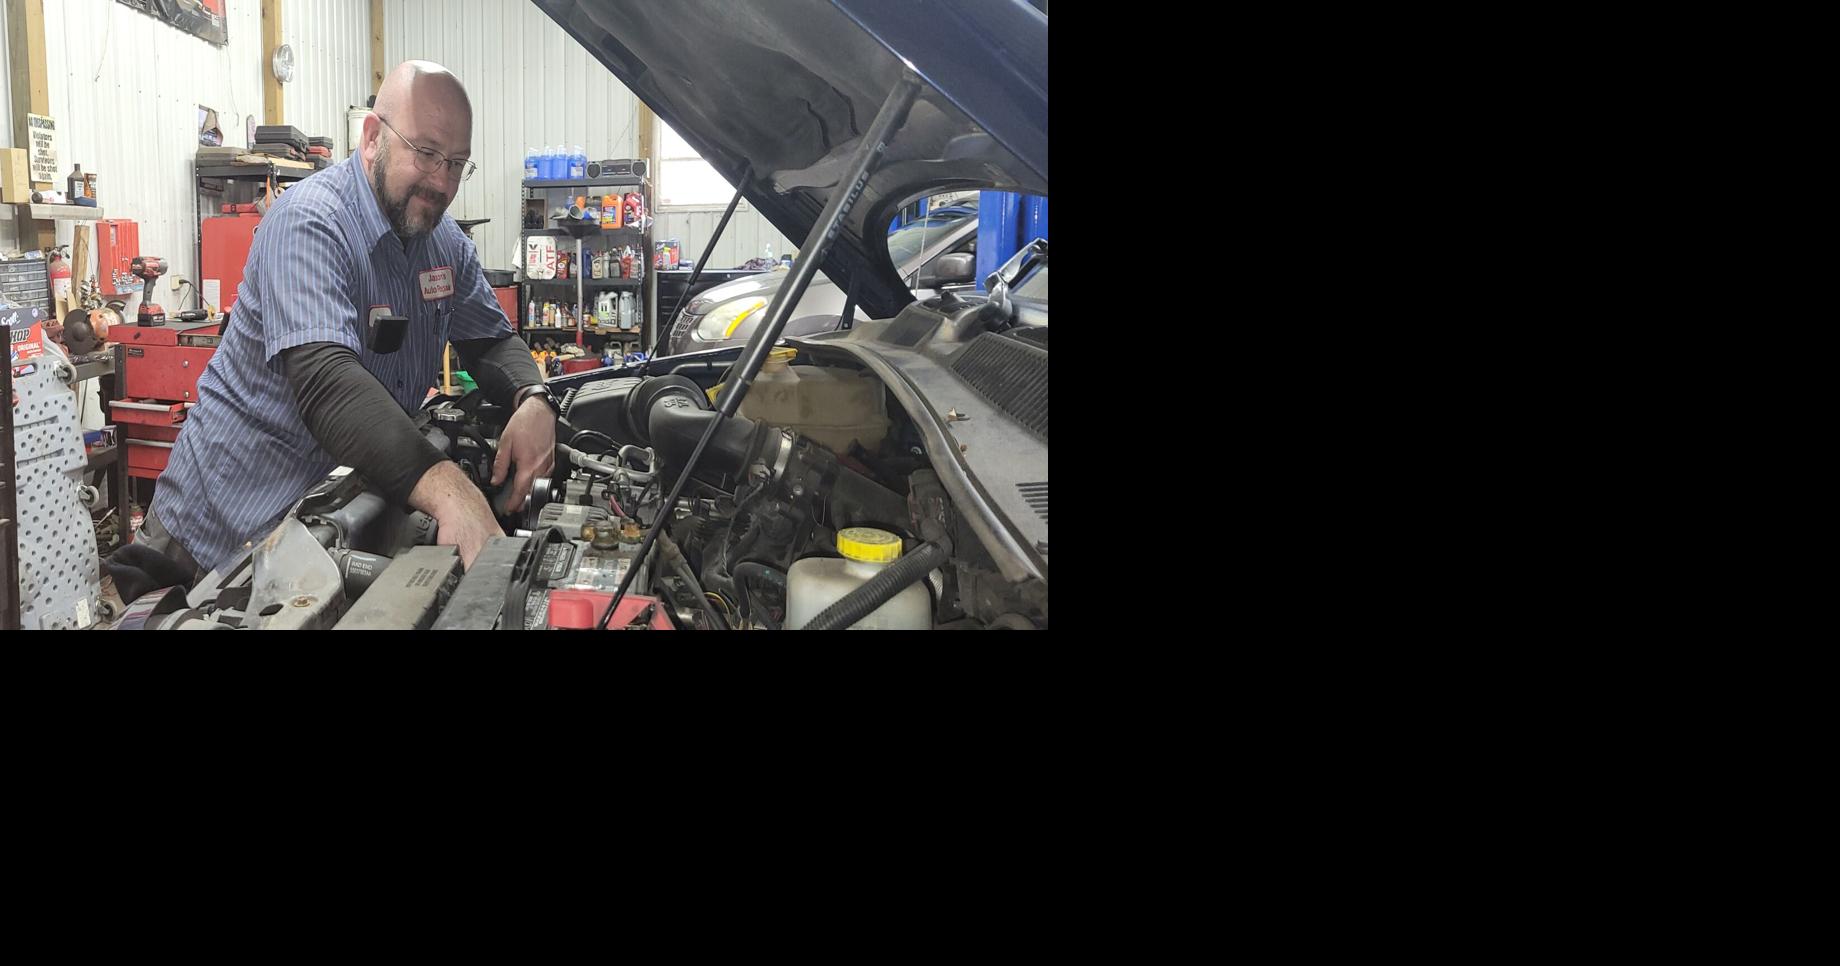 Jason’s Auto Repair, 9 years in business and counting | Local News